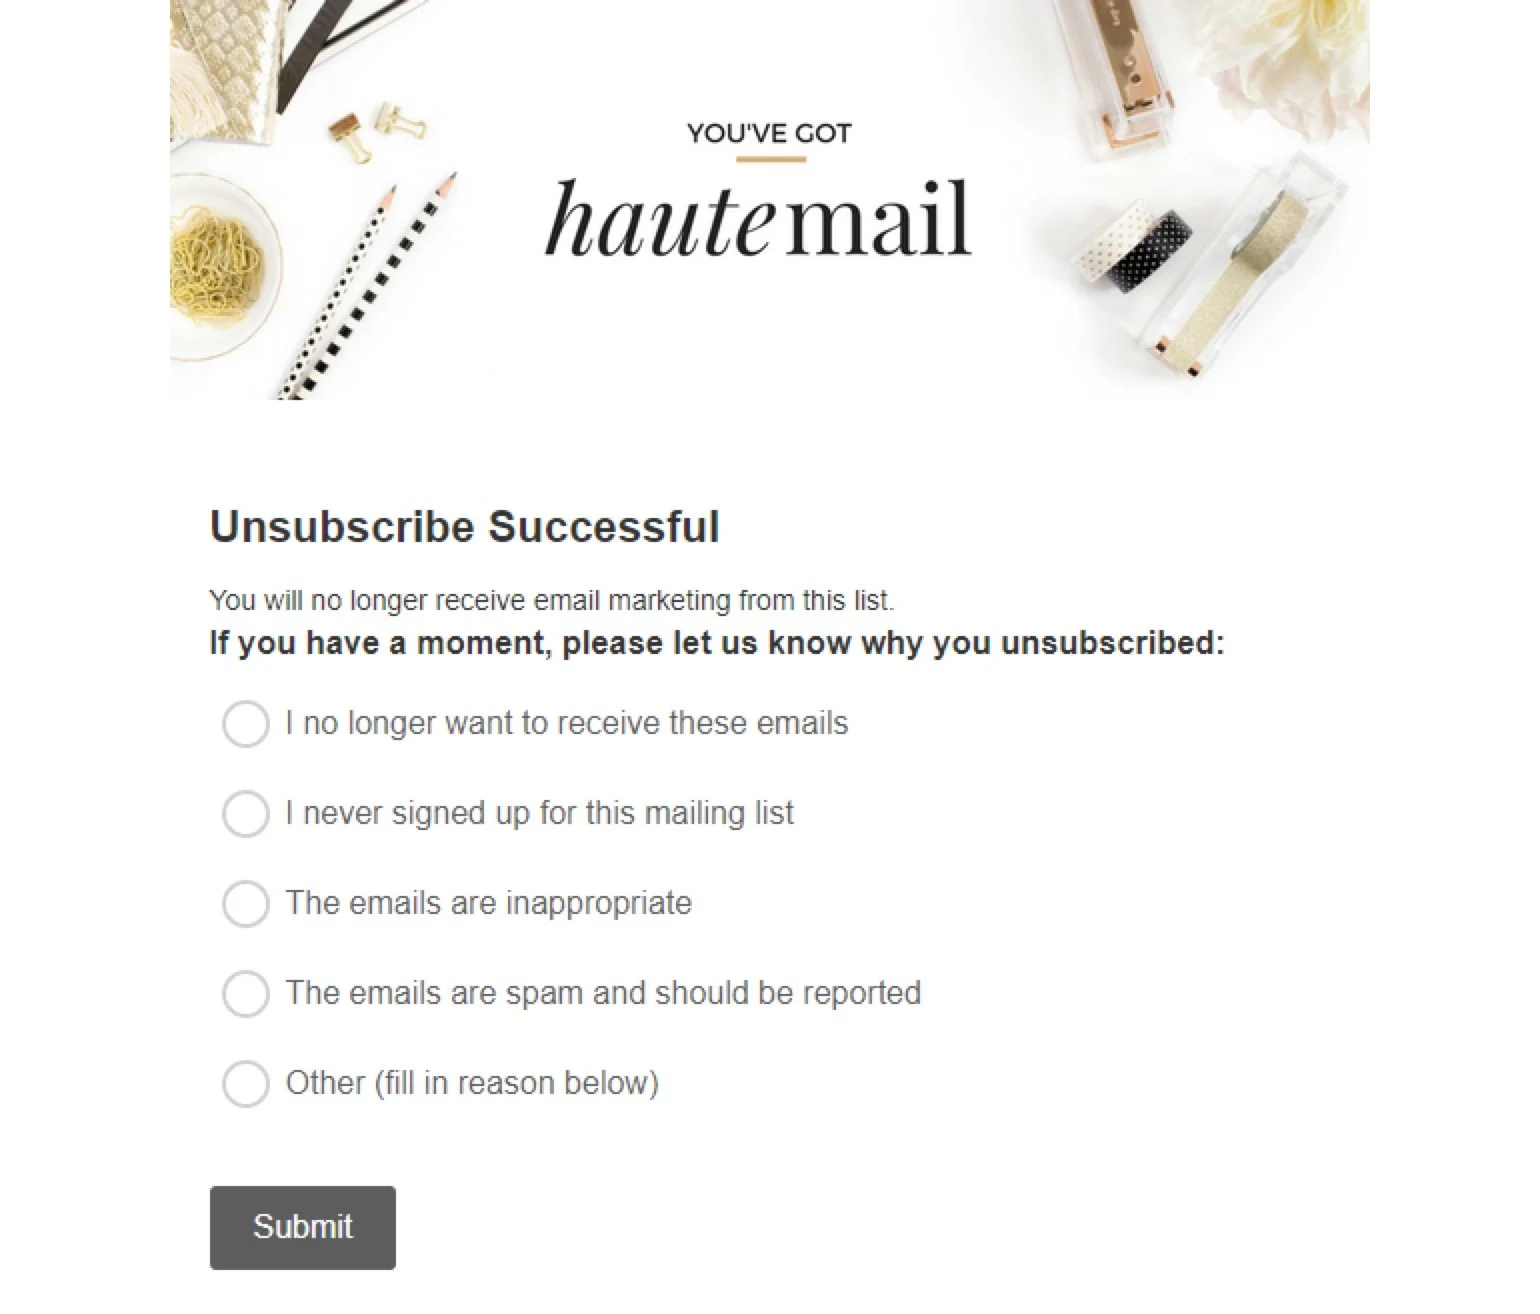 Unsubscribe letter requesting feedback